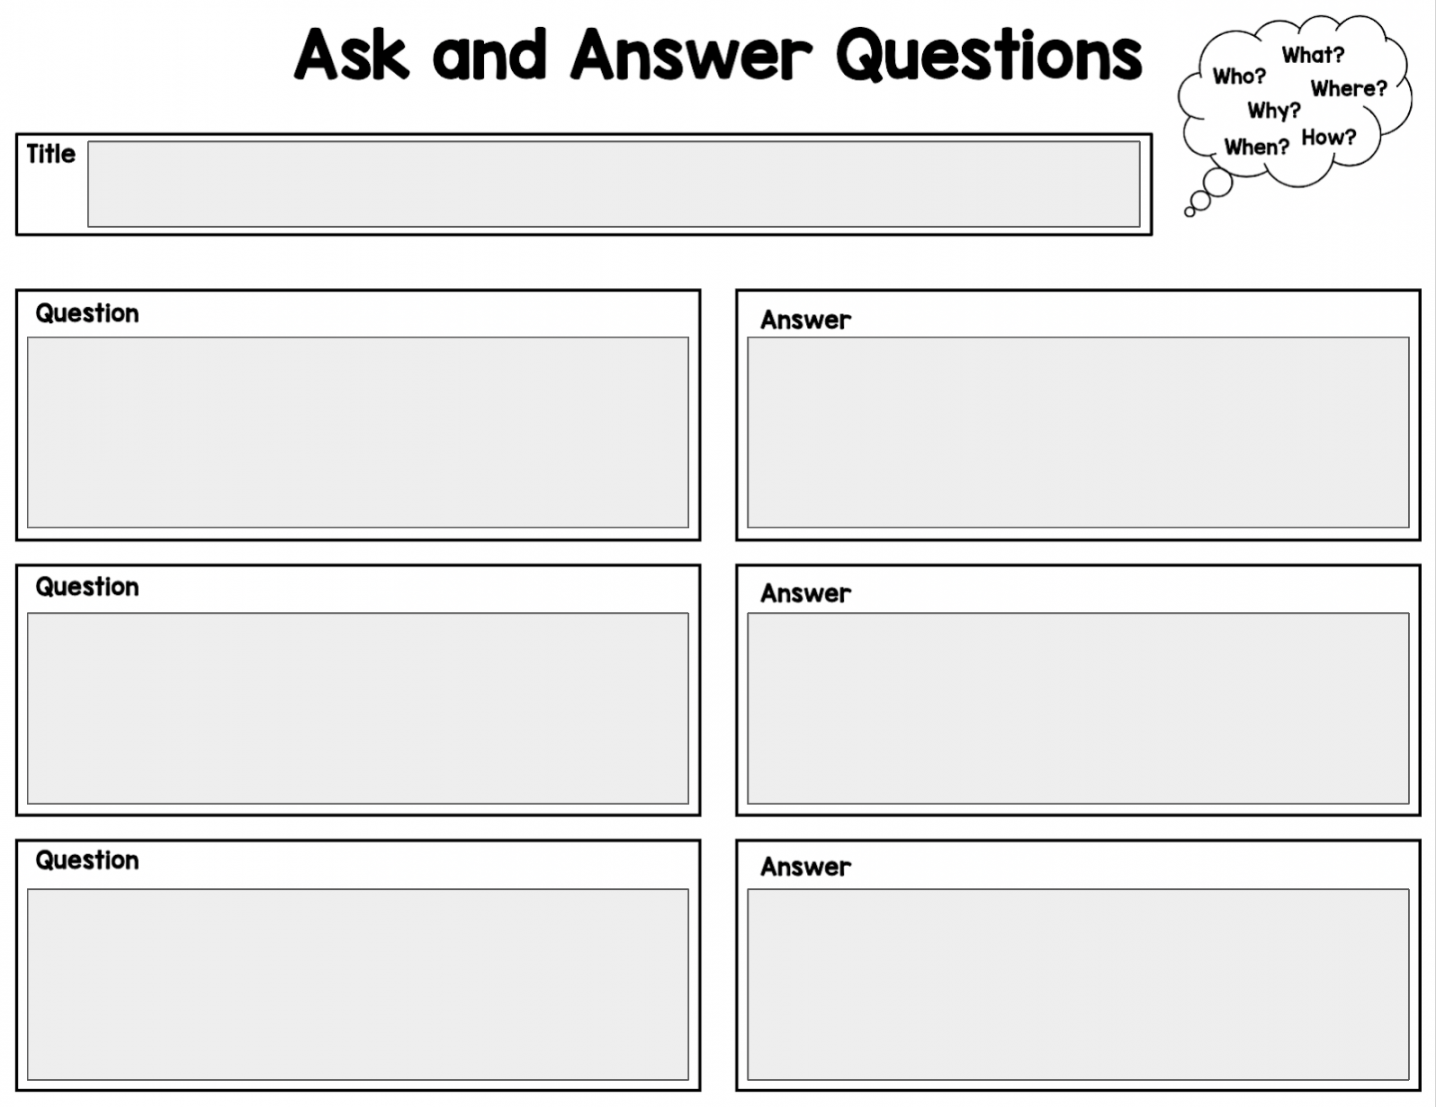 Ask and Answer Questions Digital Graphic Organizer